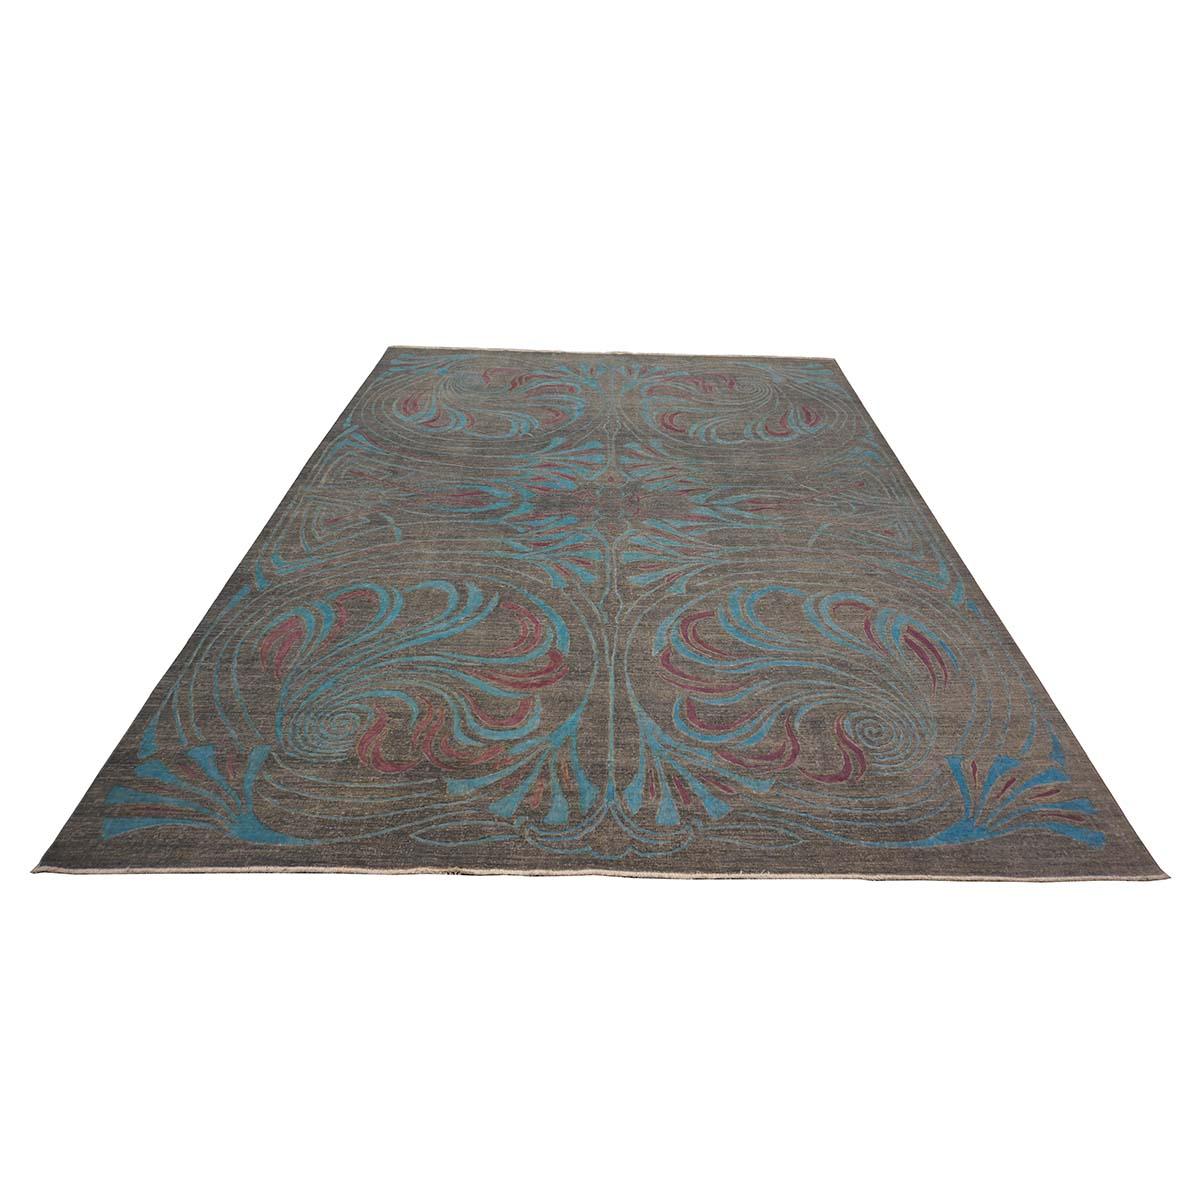 Ashly Fine Rugs presents a new distressed modern Afghan rug. These rugs have been overdyed and distressed with a custom design to give them an antique feel, but yet a modern look. In this case, the design on this piece was sheared down first to